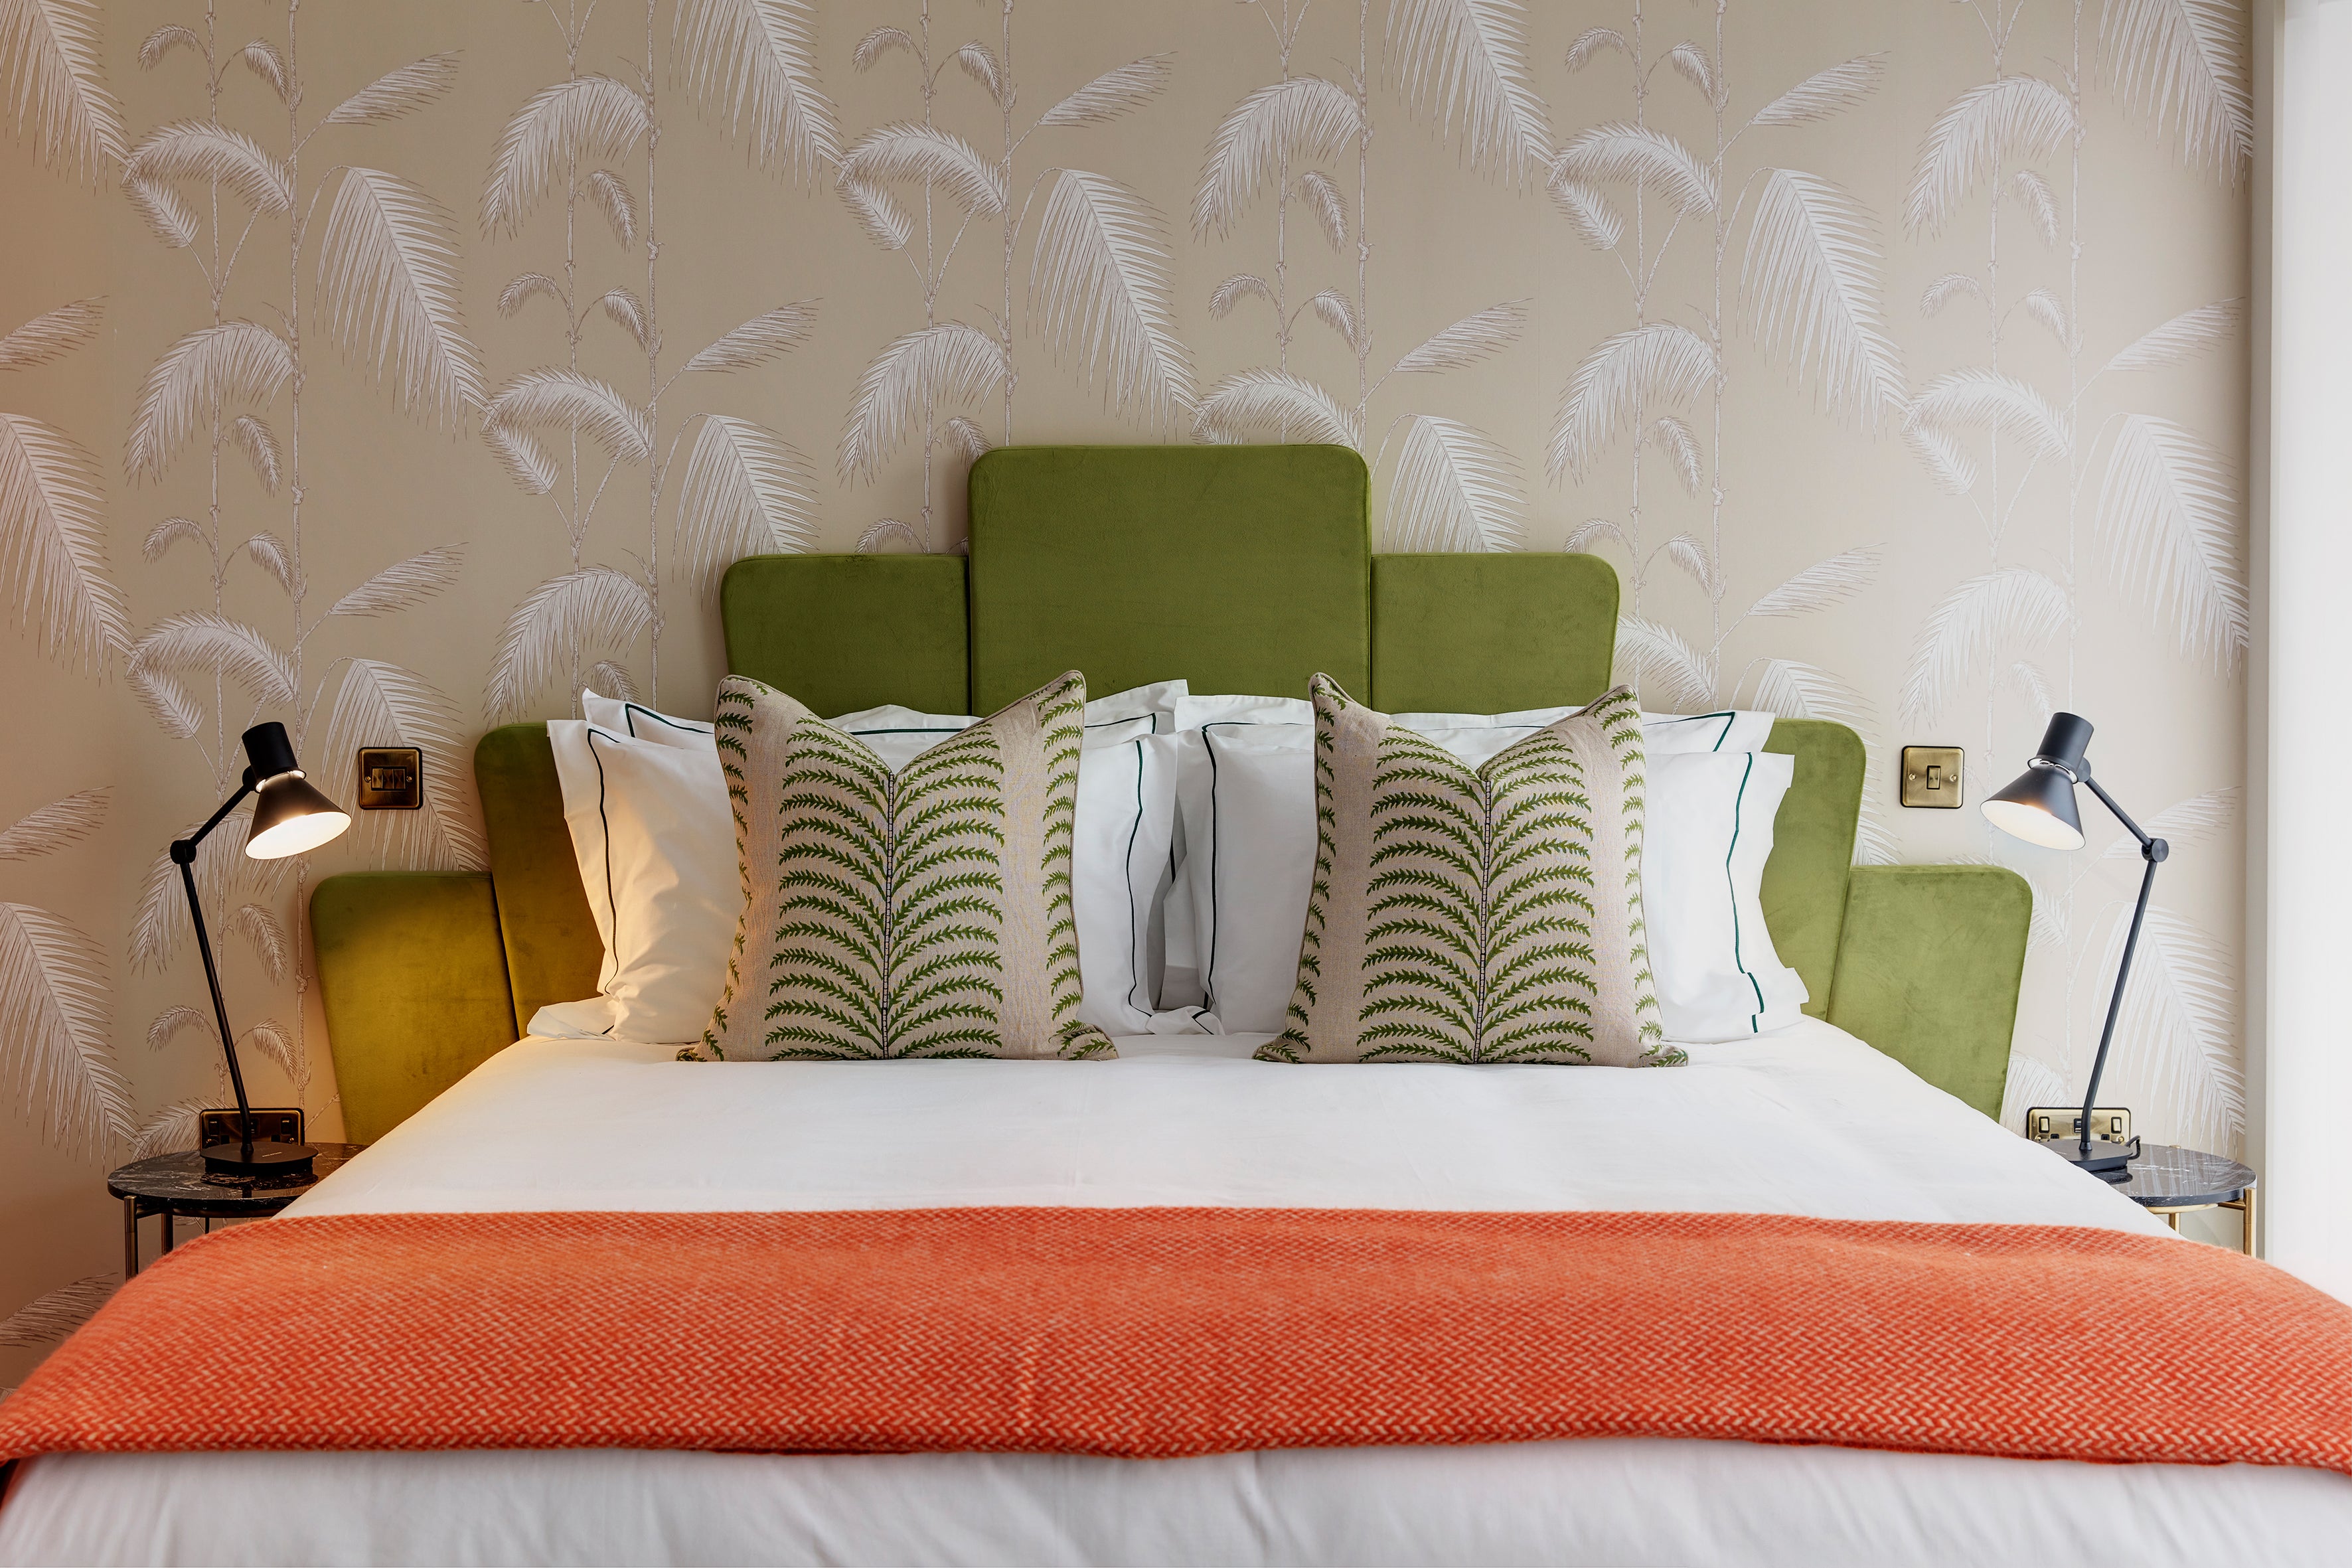 Apple-coloured flared panel headboards dress comfy double beds